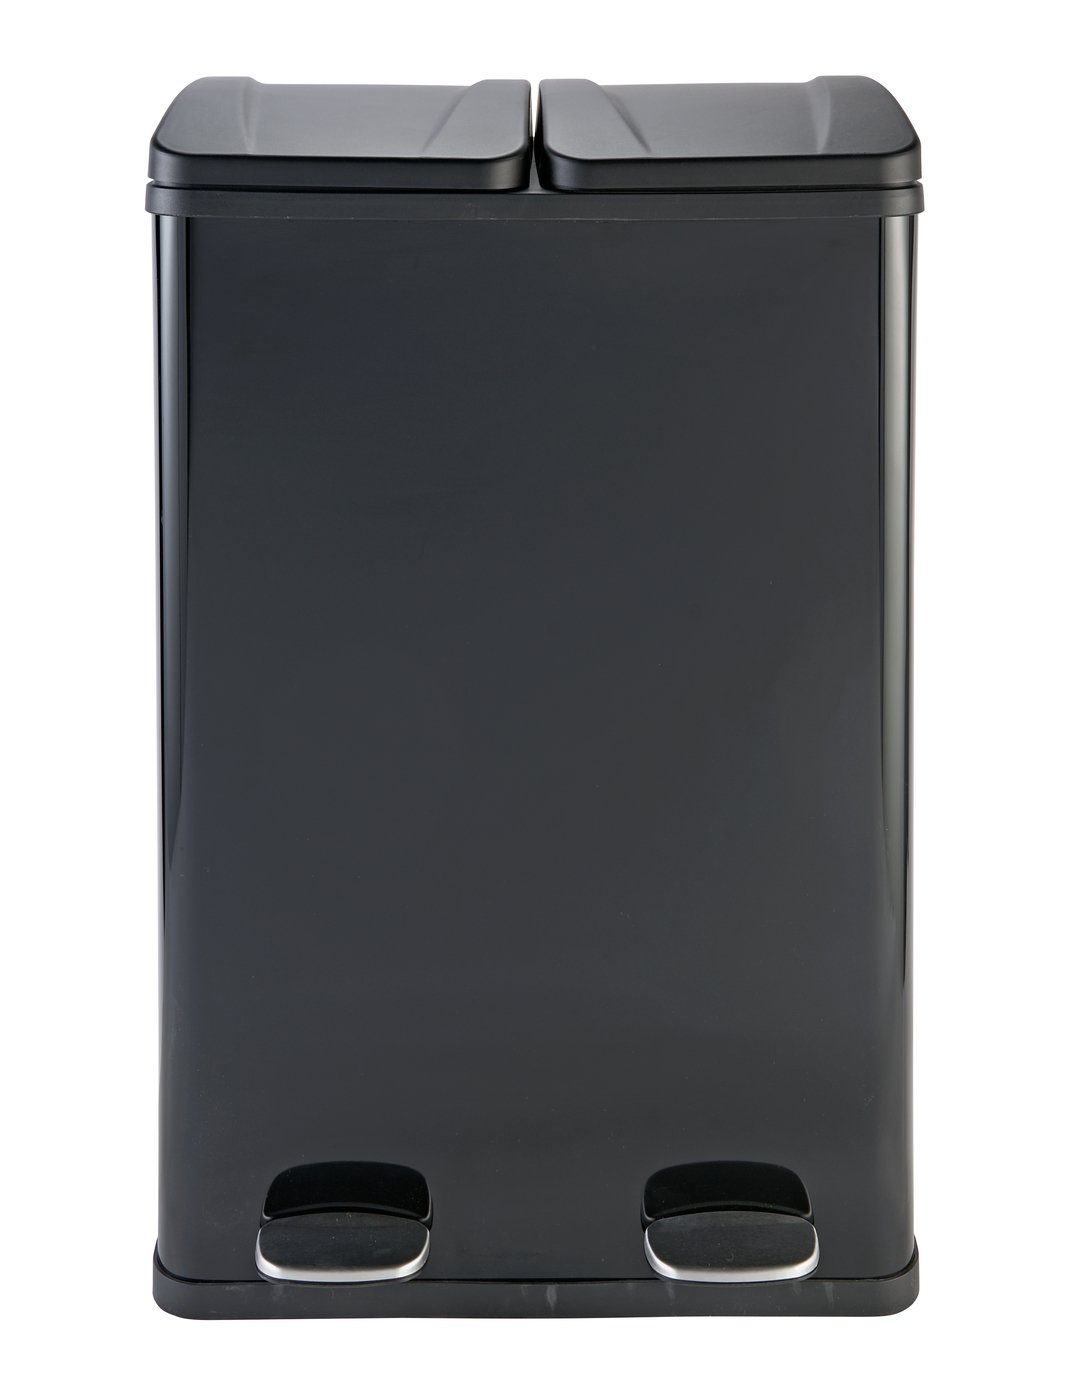 Argos Home 60 Litre 2 Compartment Recycling Bin